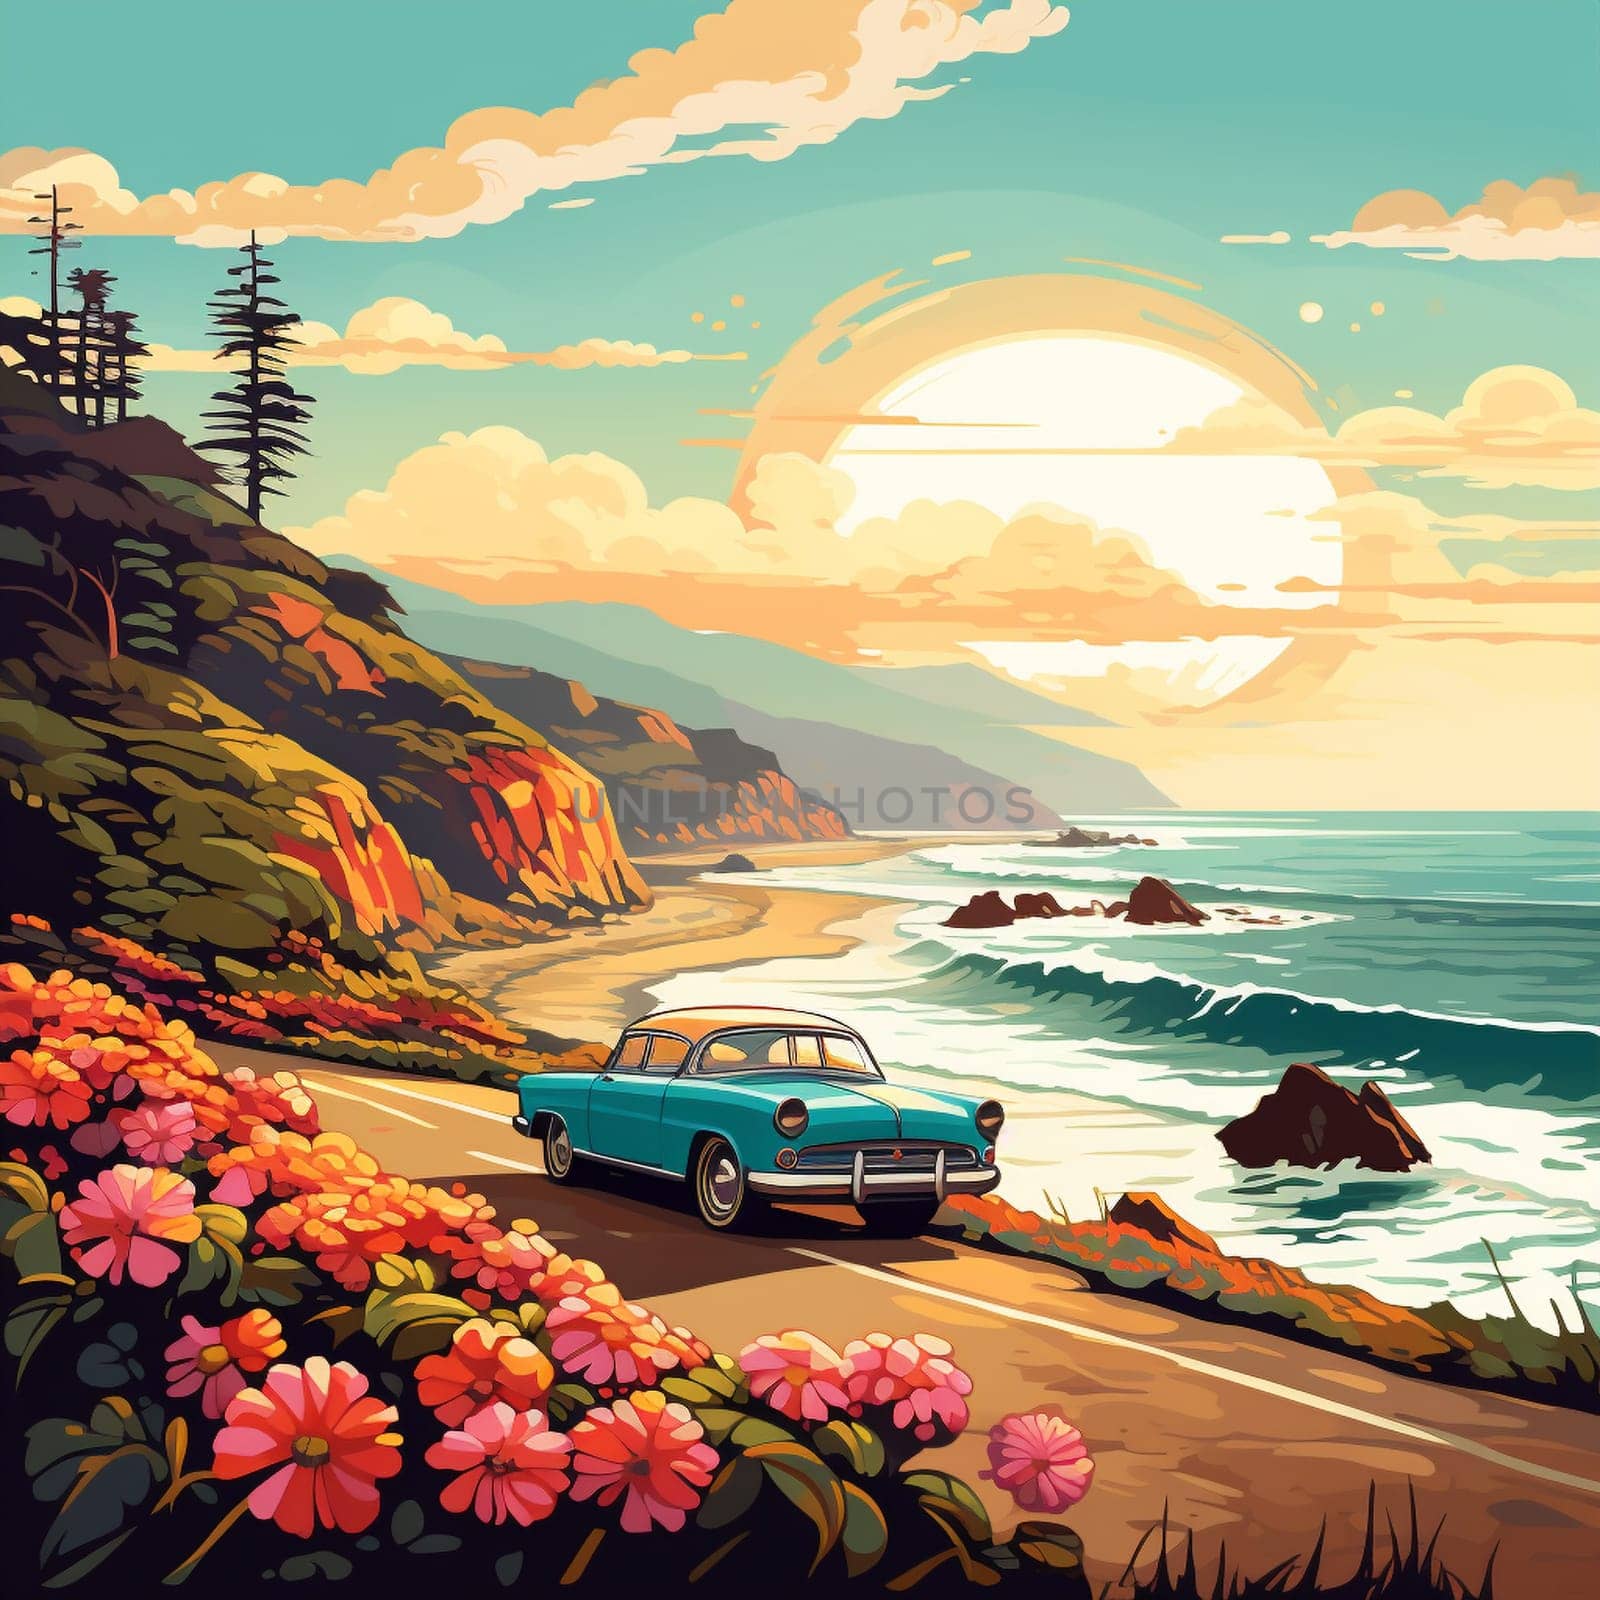 Take a trip back in time with this vibrant image of a vintage car covered in colorful flower decals, cruising down a sunlit coastal road. Reminiscent of retro travel posters from the 1960s, this art style captures the essence of a carefree and adventurous era.